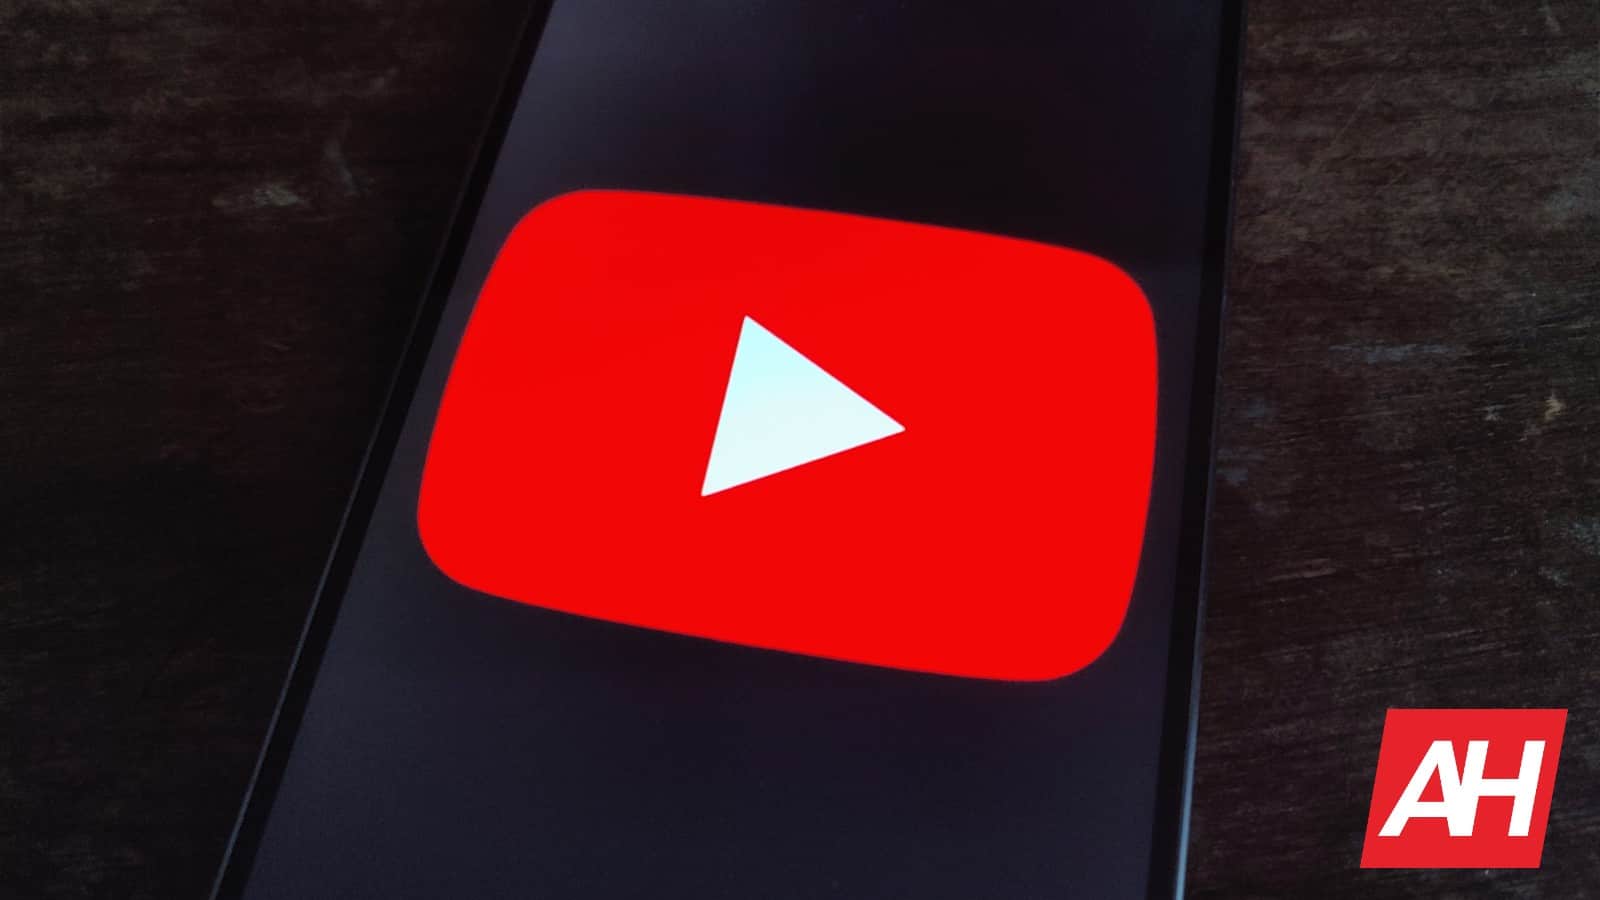 YouTube is once again responding to the NSFW ad problem